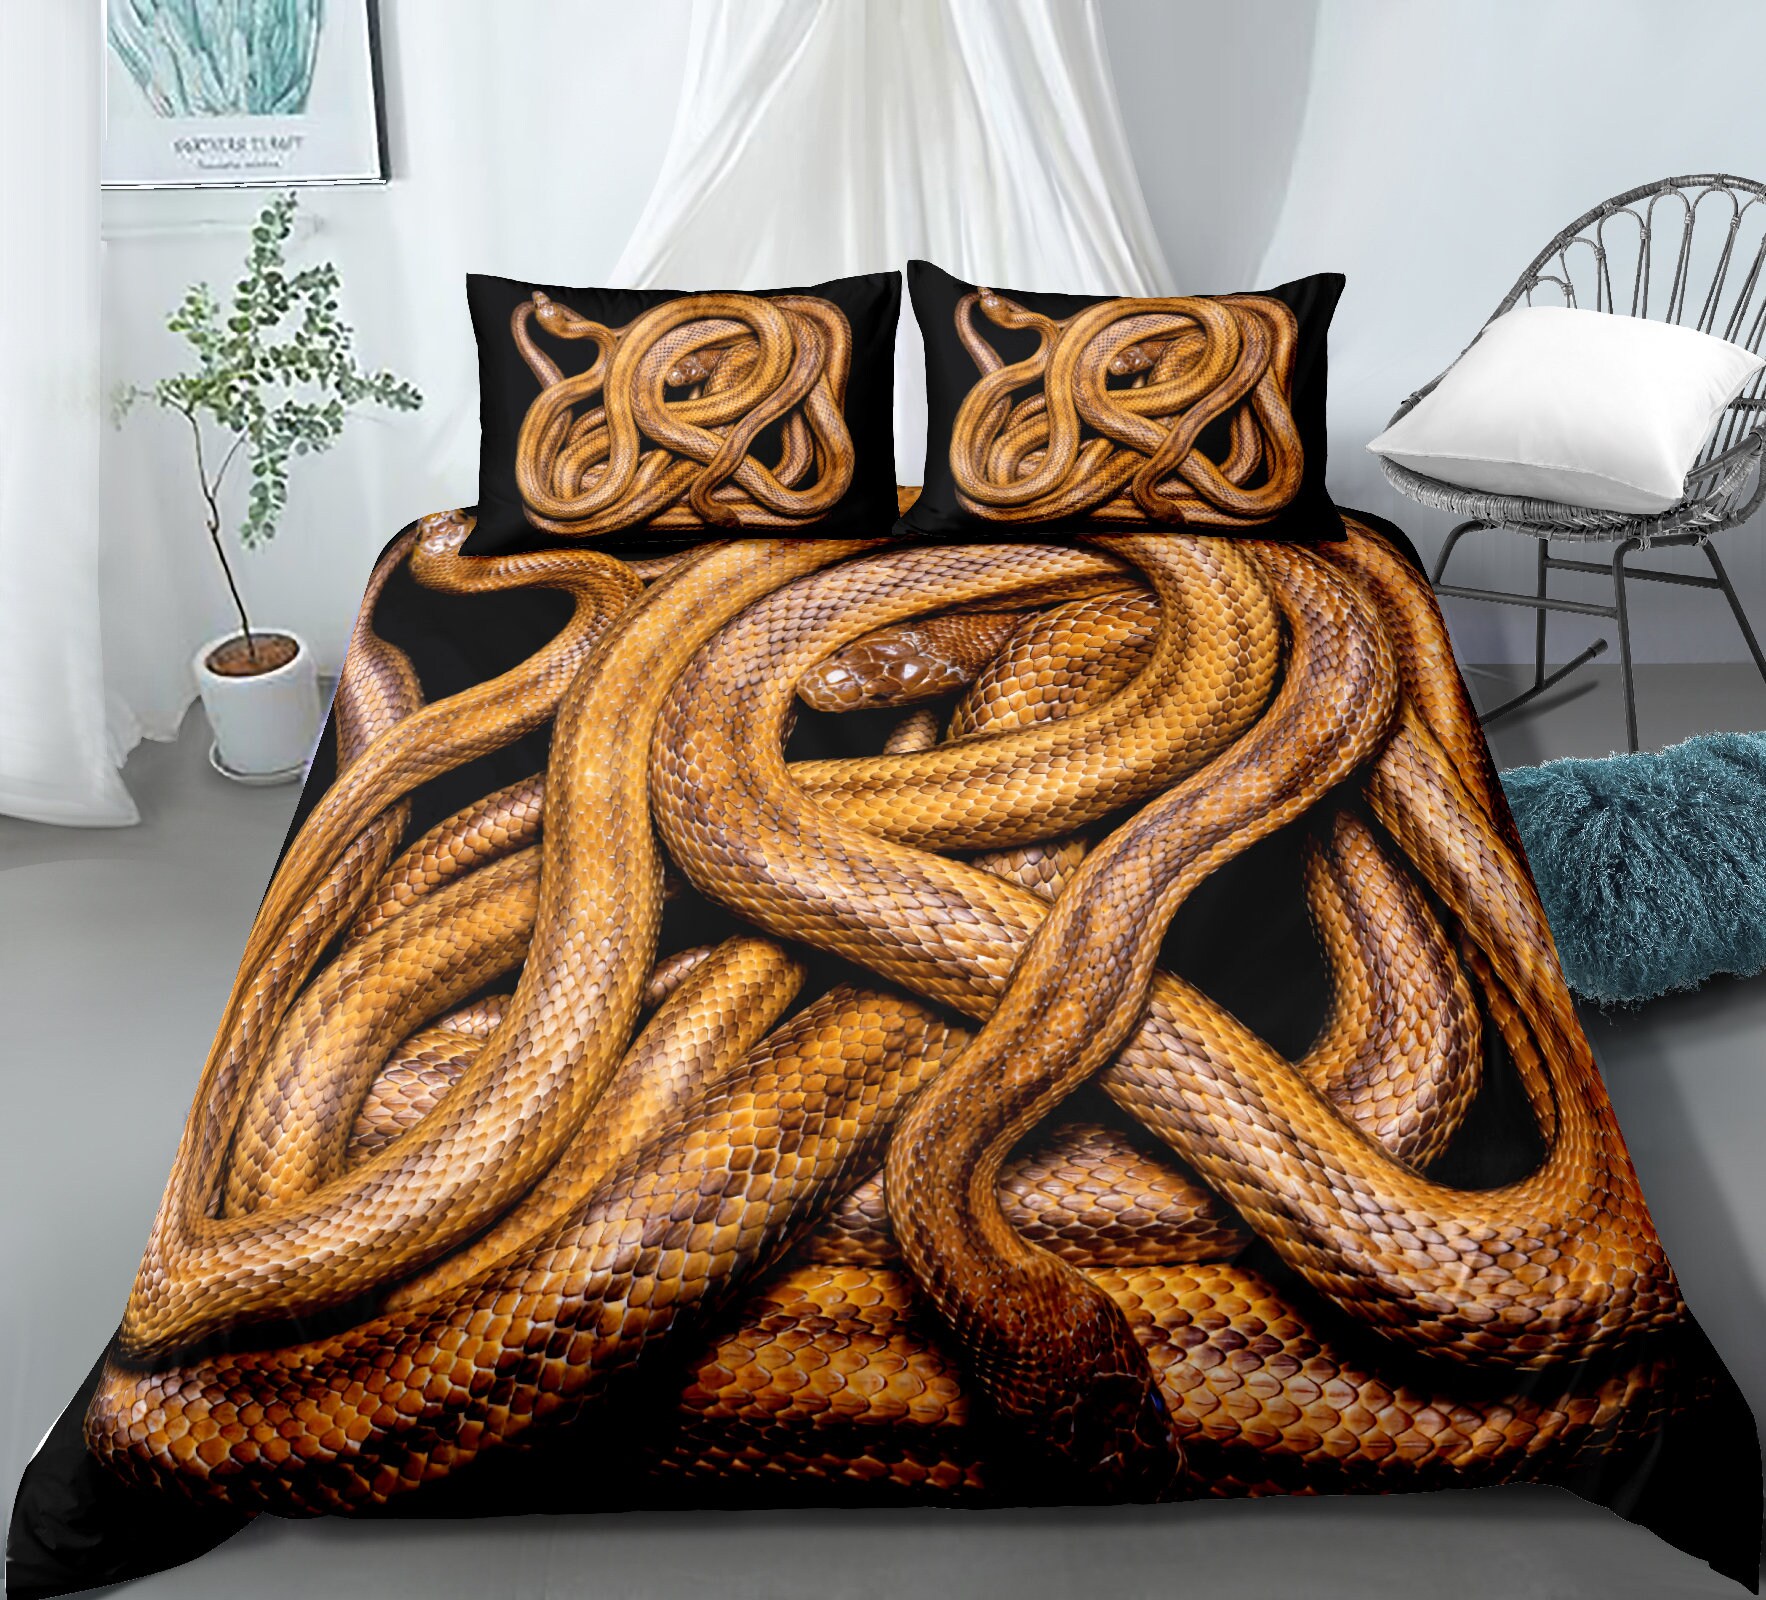 Snake Coverlet Set Cold-Blooded Animal Printed Decor Teal Quilted Coverlet Natural Theme Bedding Comforters Set Wild Animal Snake Pattern Bed Cover Set for Adult Women Boys Teens Soft Twin Size